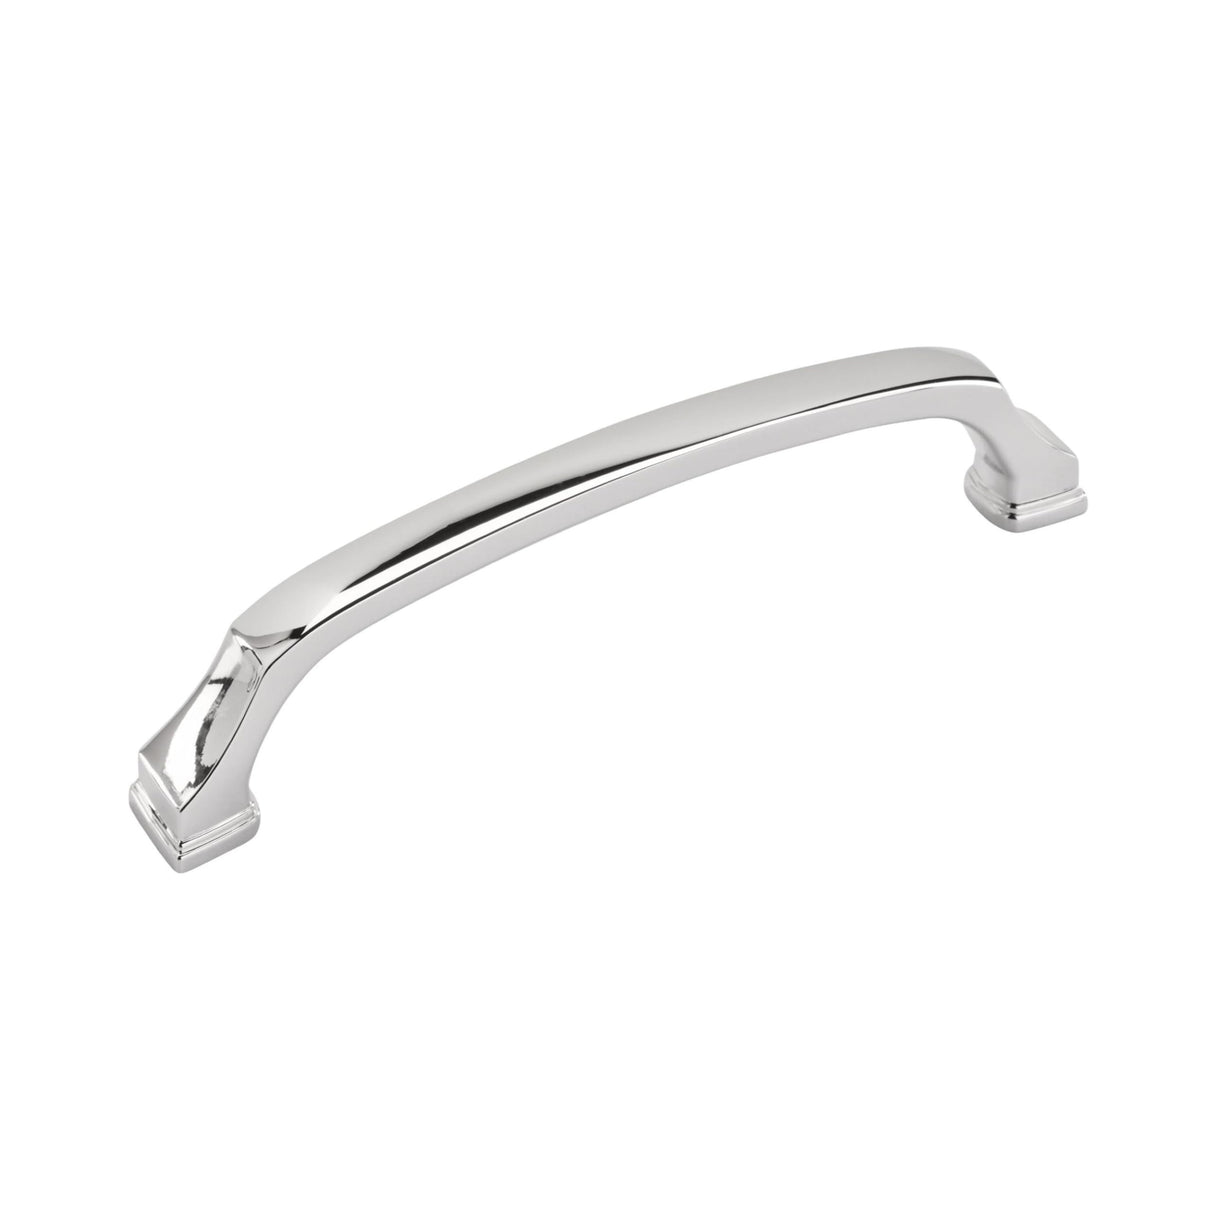 Amerock Cabinet Pull Polished Chrome 6-5/16 inch (160 mm) Center to Center Revitalize 1 Pack Drawer Pull Drawer Handle Cabinet Hardware